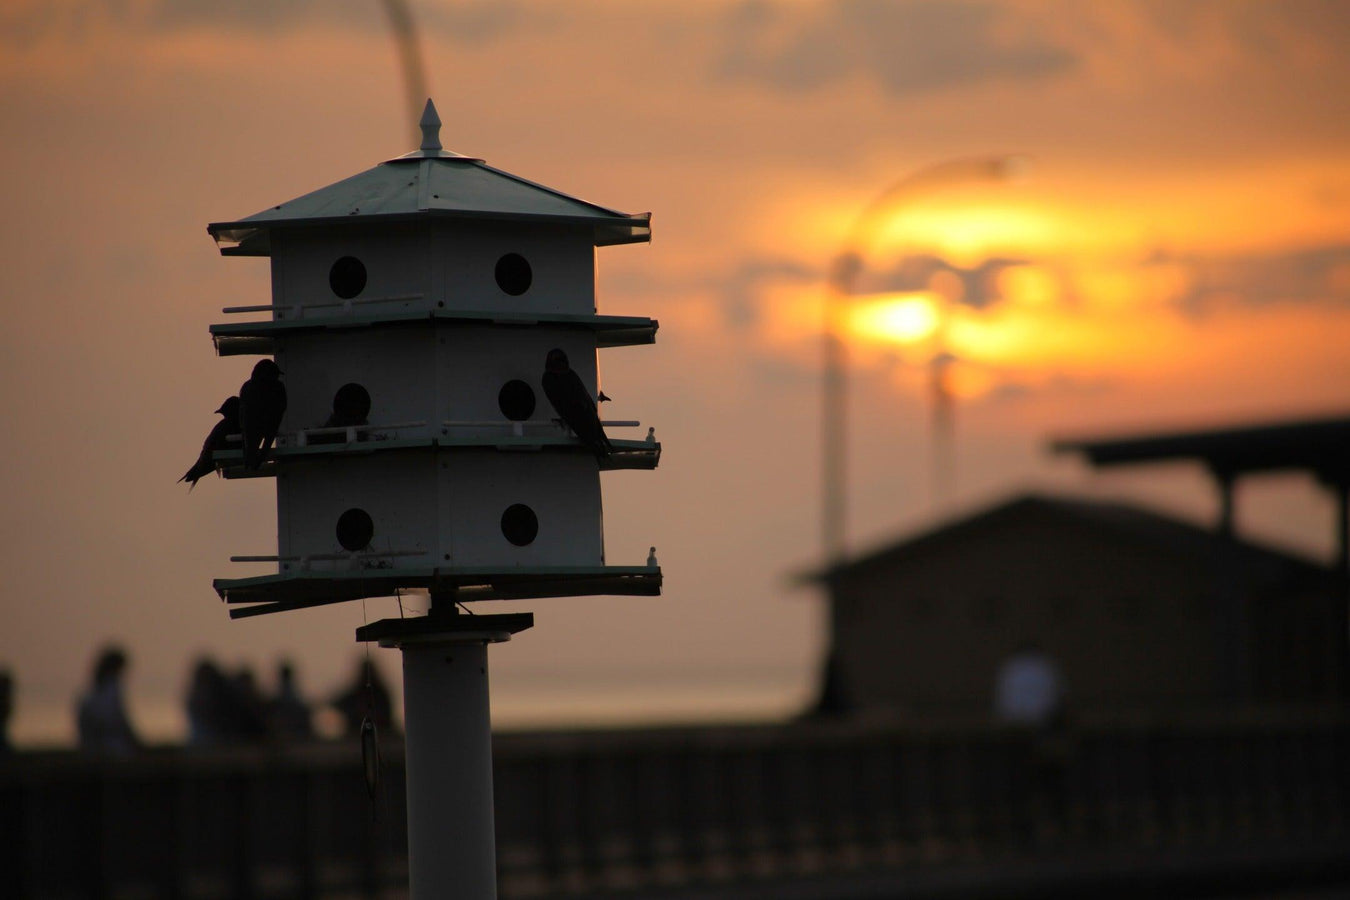 Purple Martin Houses and Accessories